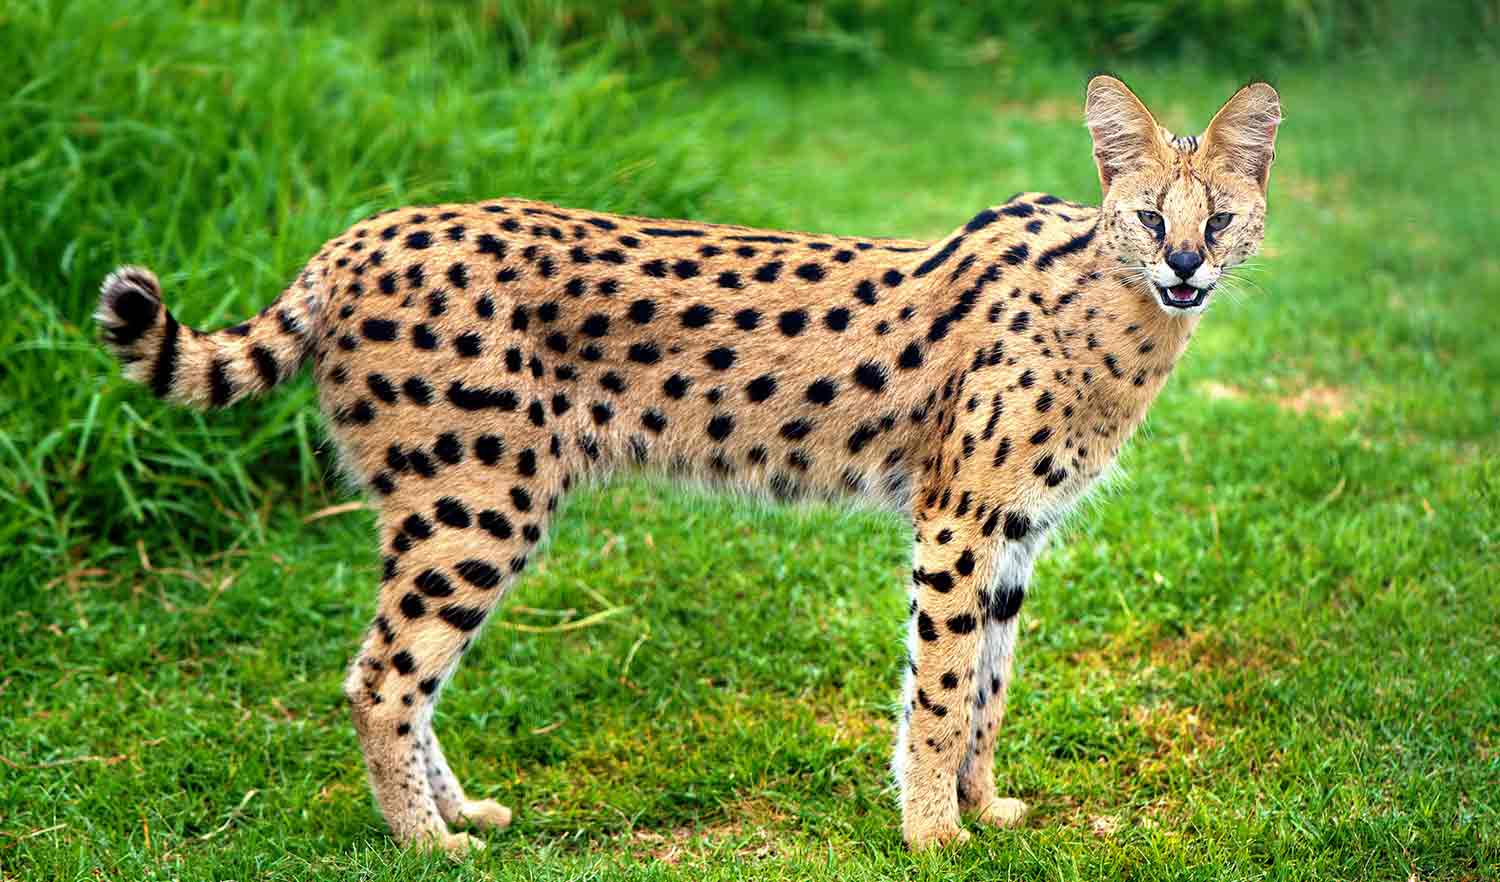 A spotted cat called a serval stands in a grassy area and looks at the camera.